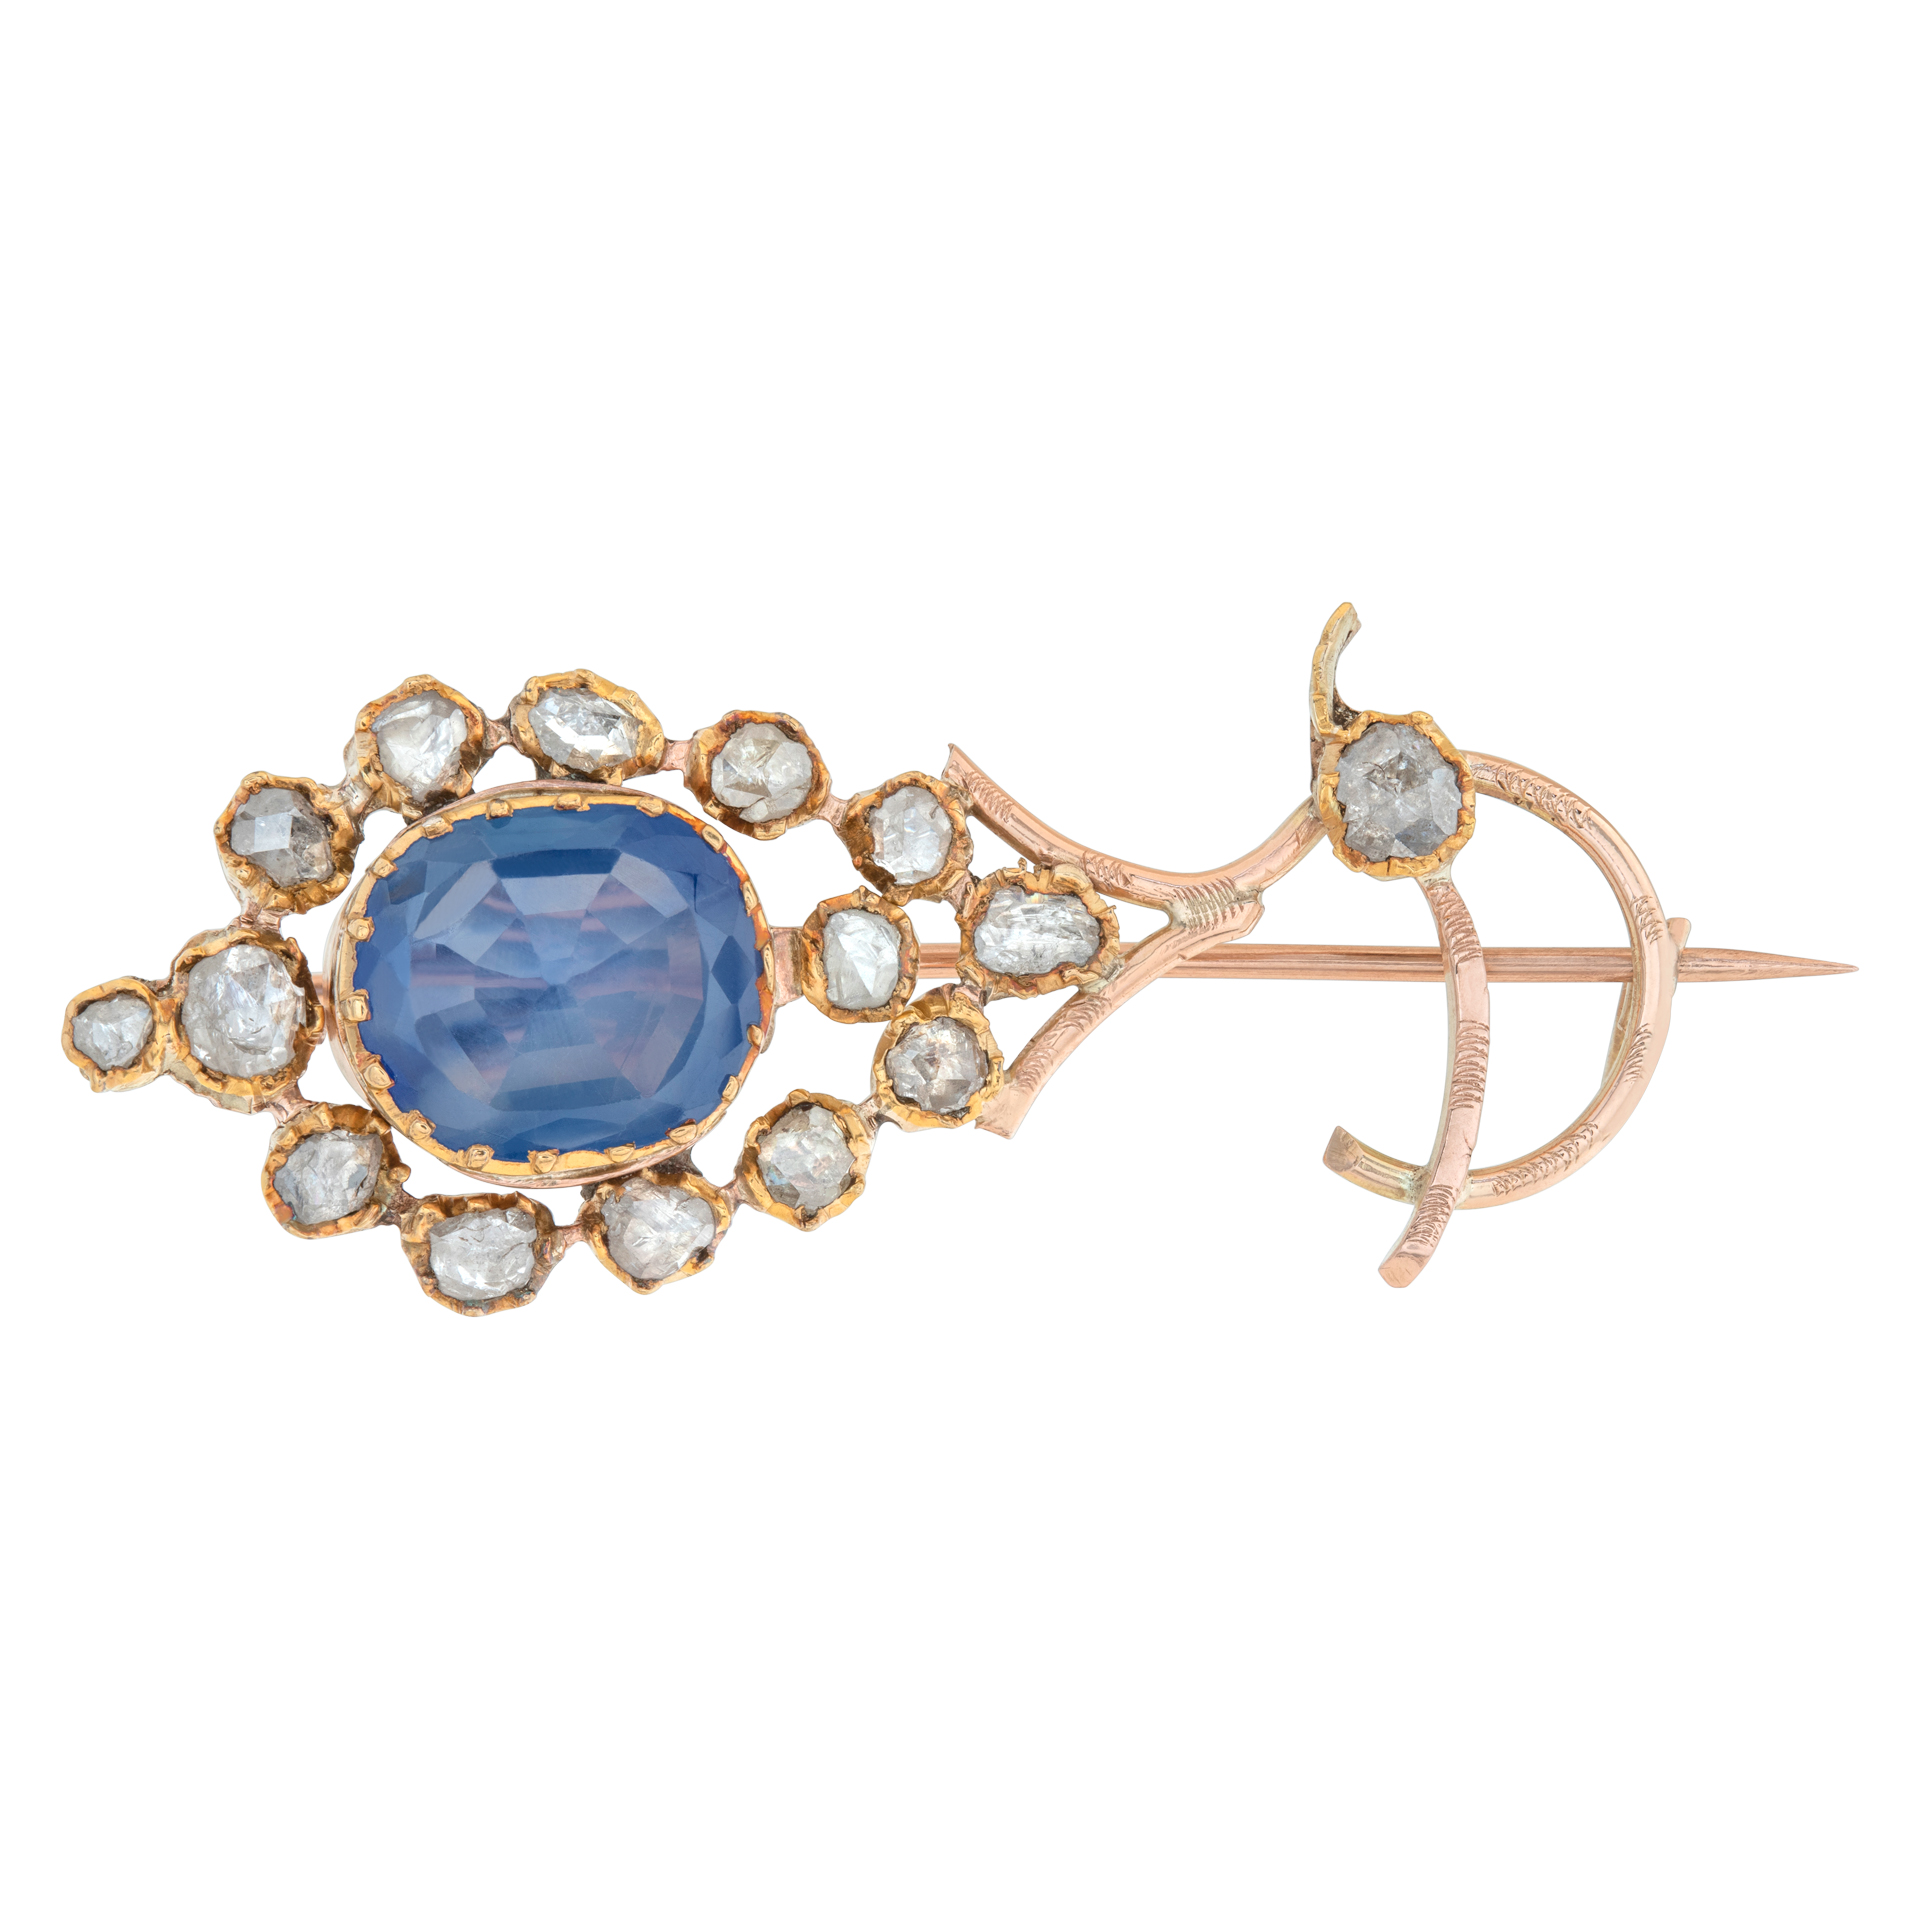 Antique European brooch, circa 1800's. with old mine cut diamonds and unheated natural sapphire center, set in 18k yellow gold.